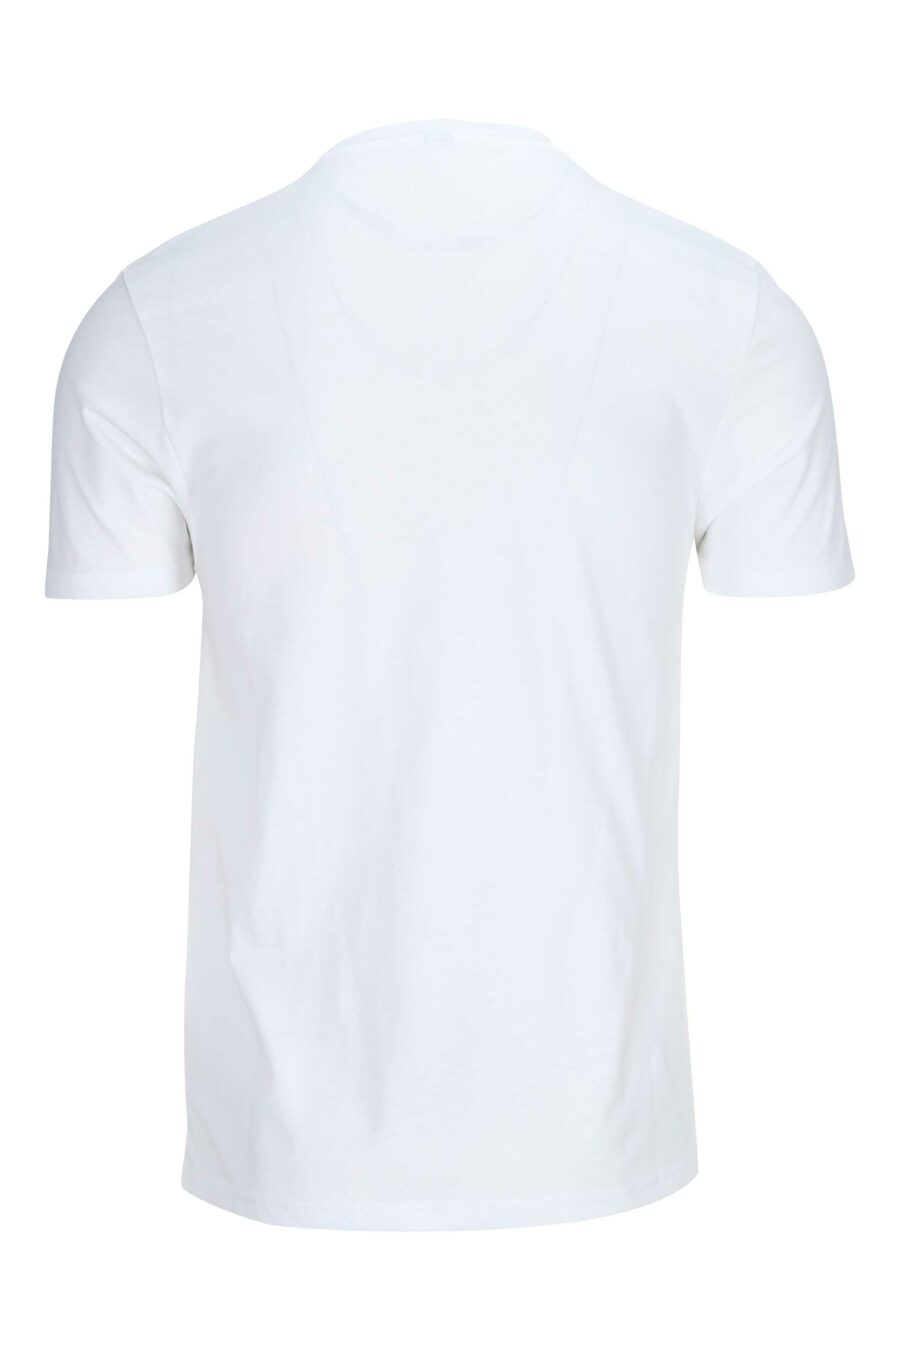 White T-shirt with logo on shoulders in ribbon - 667113024998 1